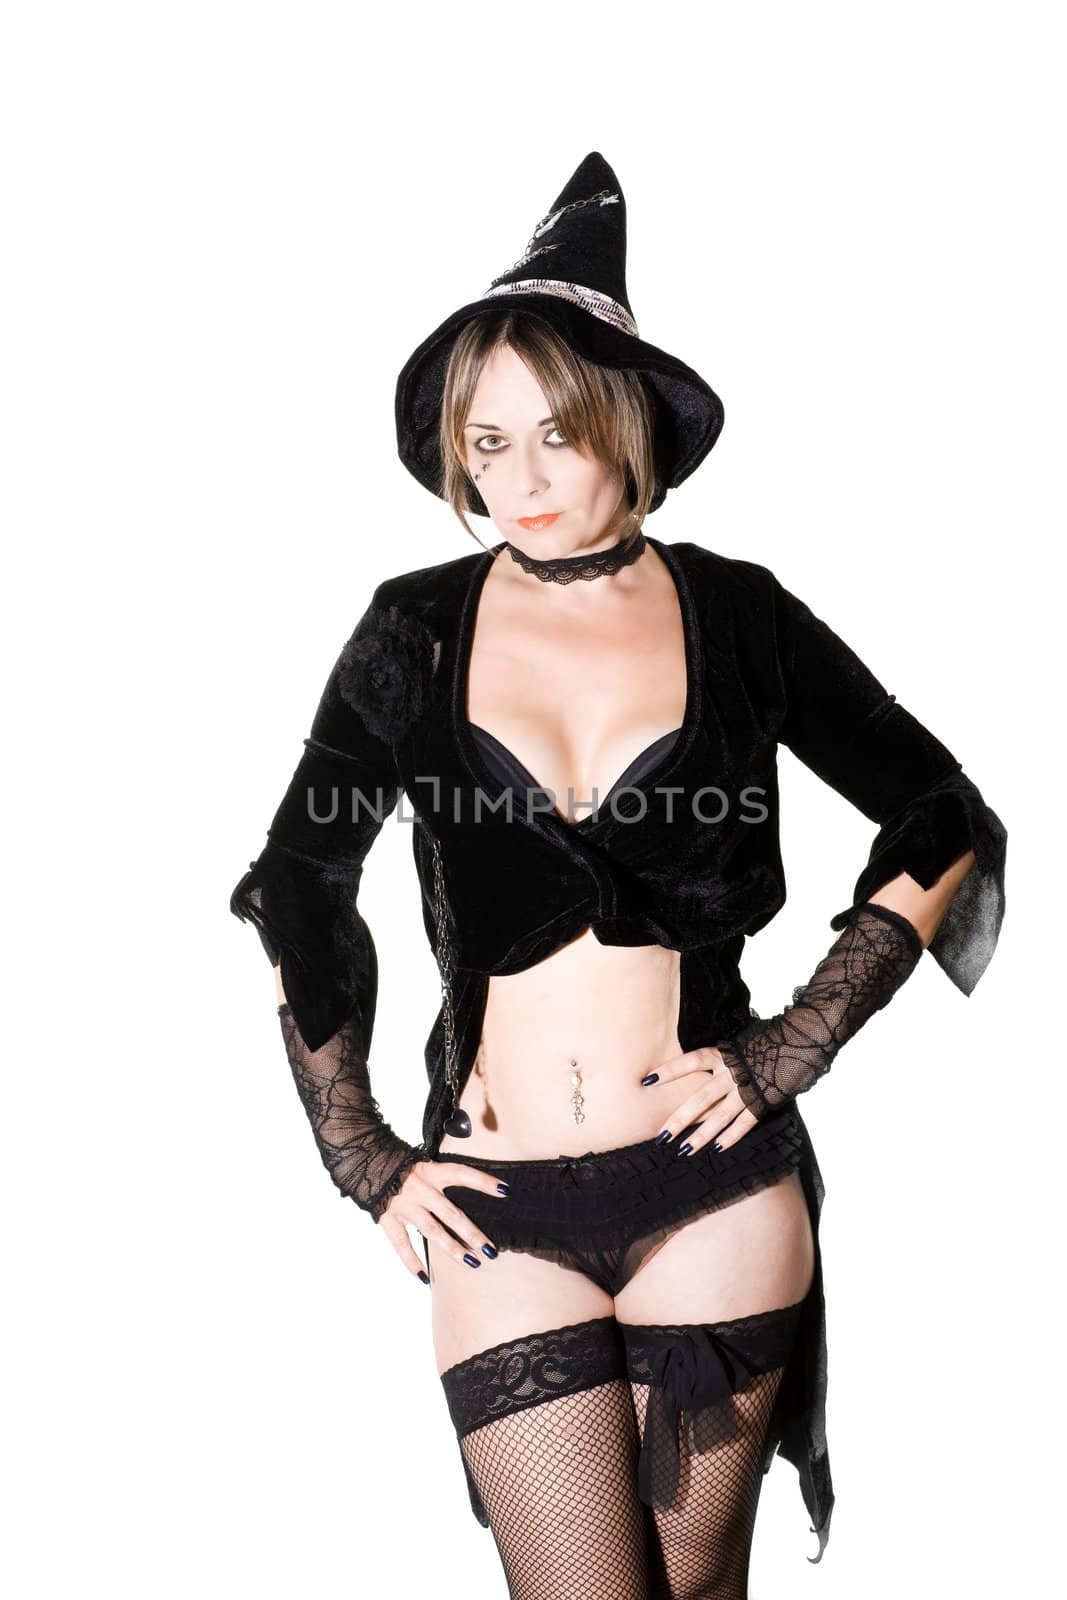 studio photo of a woman dressed as a witch isolated on white